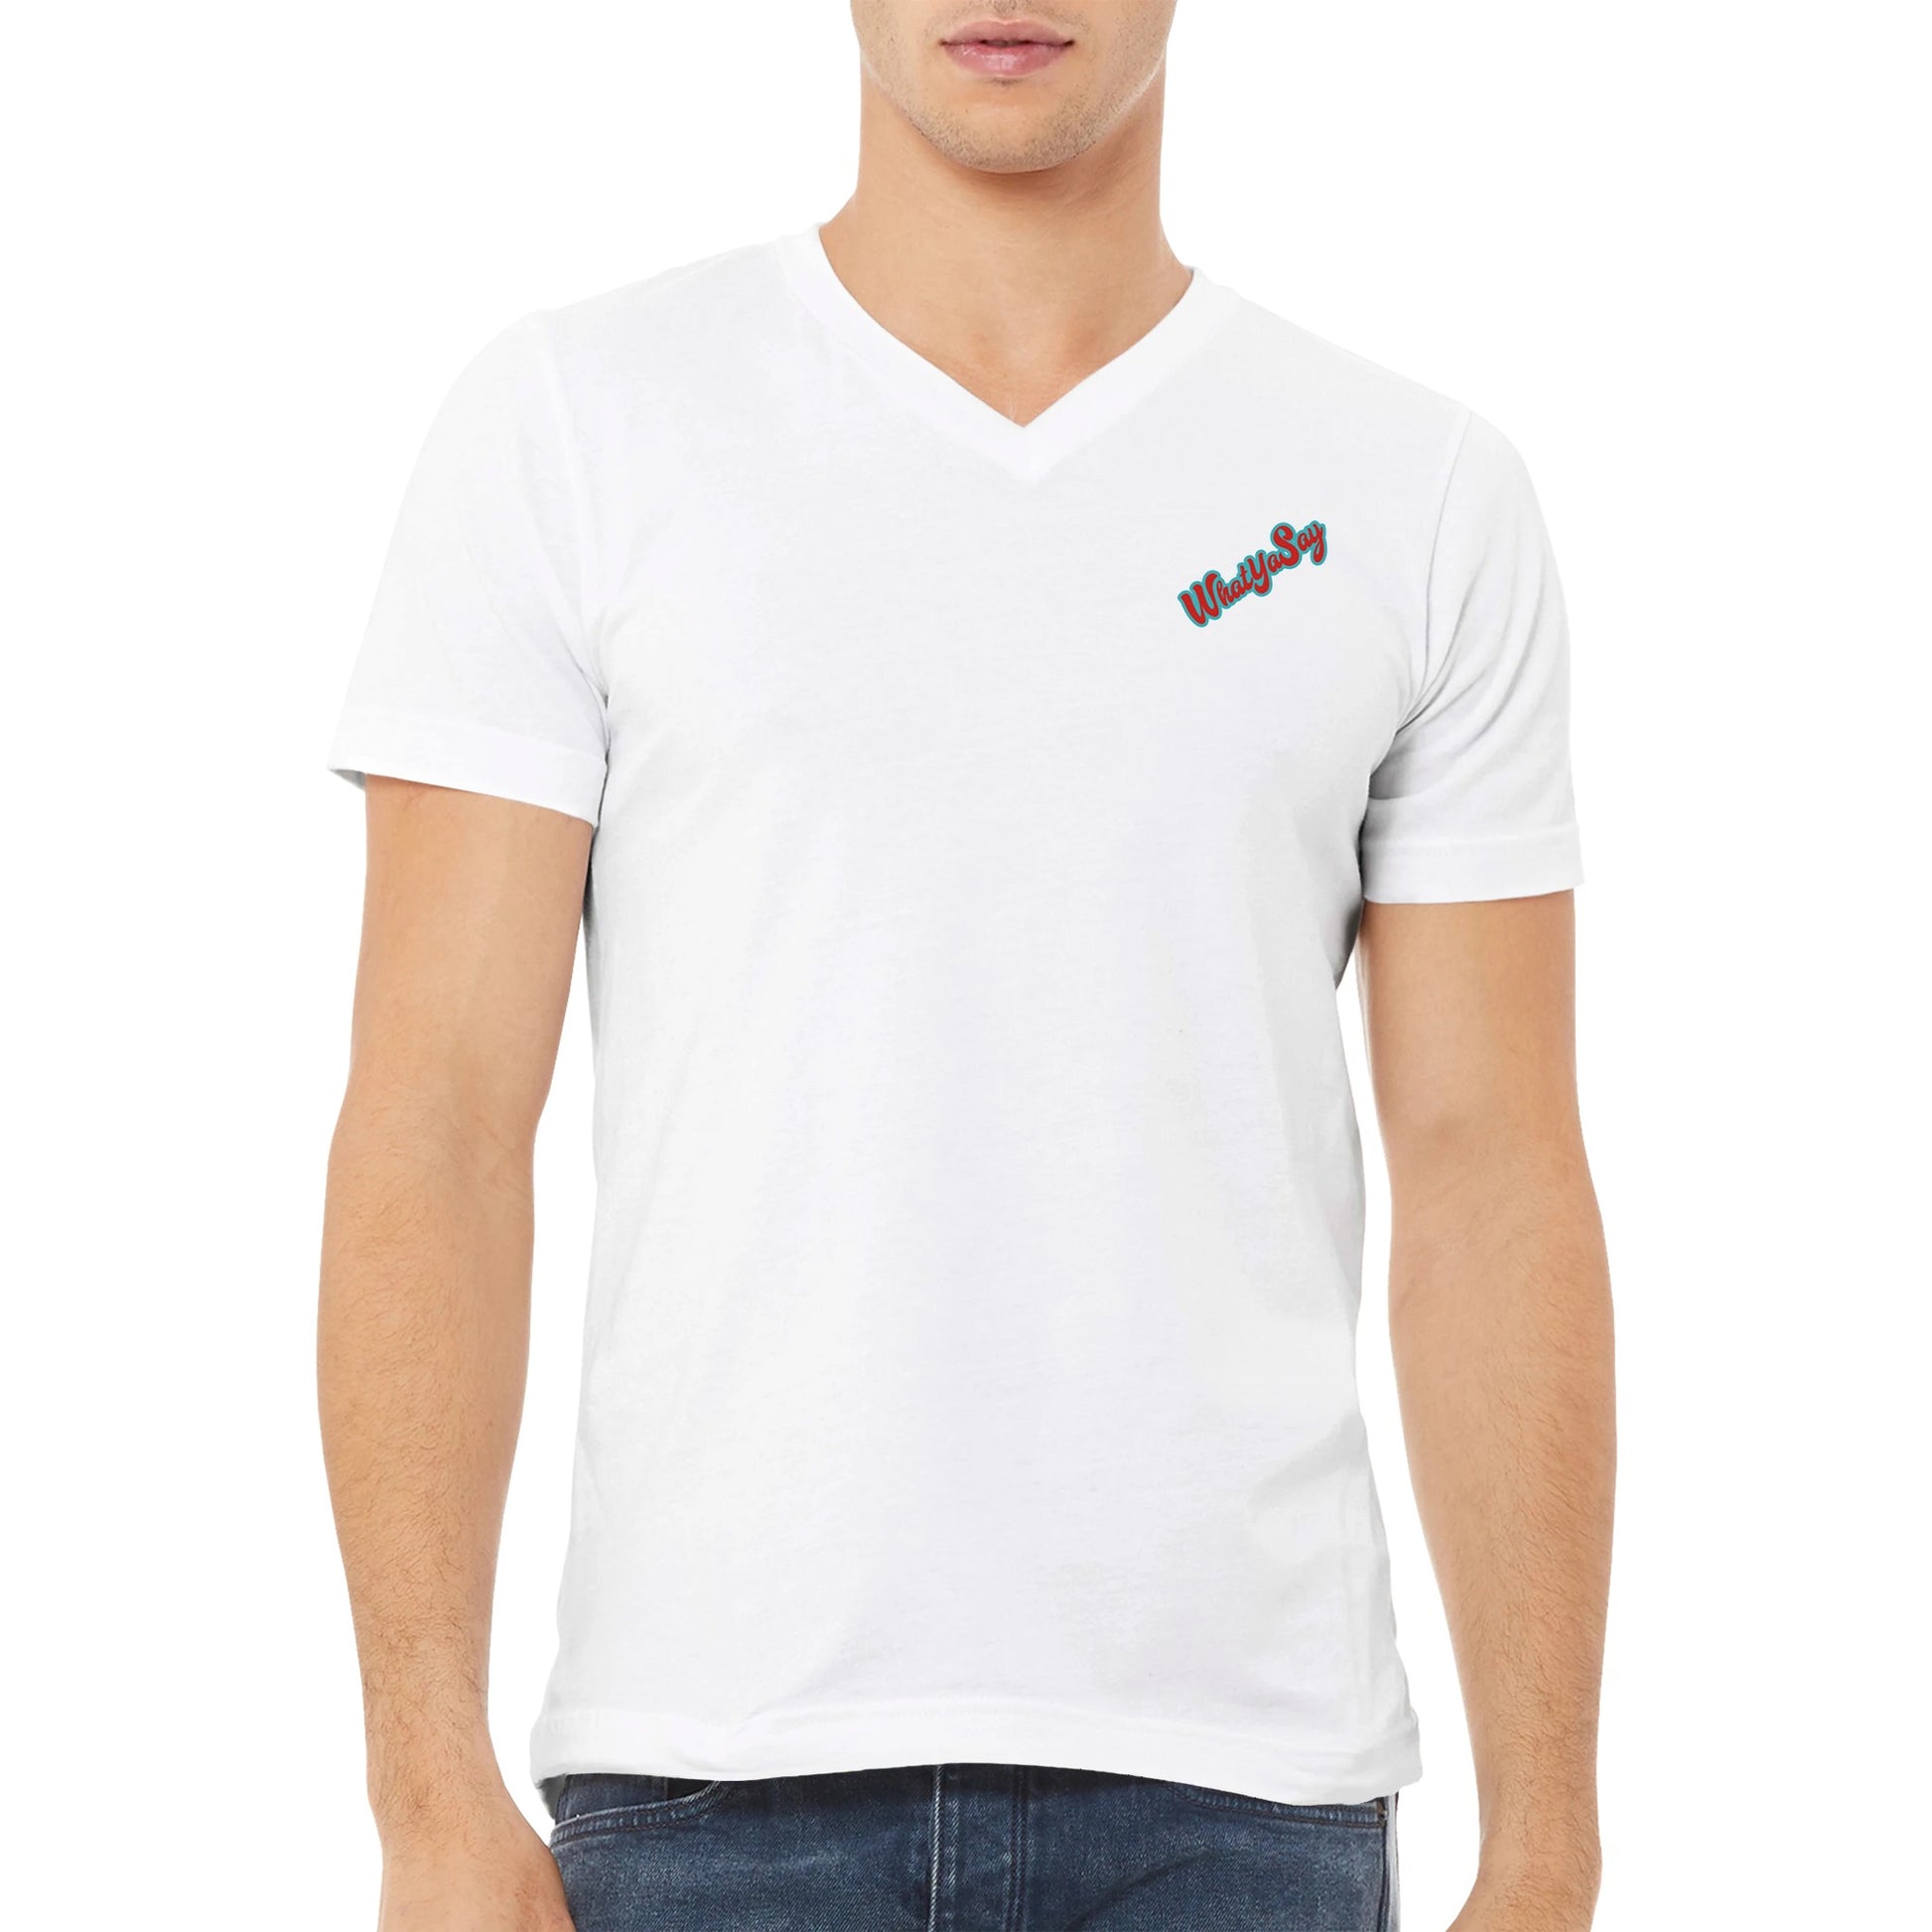 A white premium unisex v-neck t-shirt with original artwork and motto I need my Ass in the Sand and a Margarita in my hand on back and WhatYa Say logo on front made with combed and ring-spun cotton from WhatYa Say Apparel worn by A brown-haired male front view.